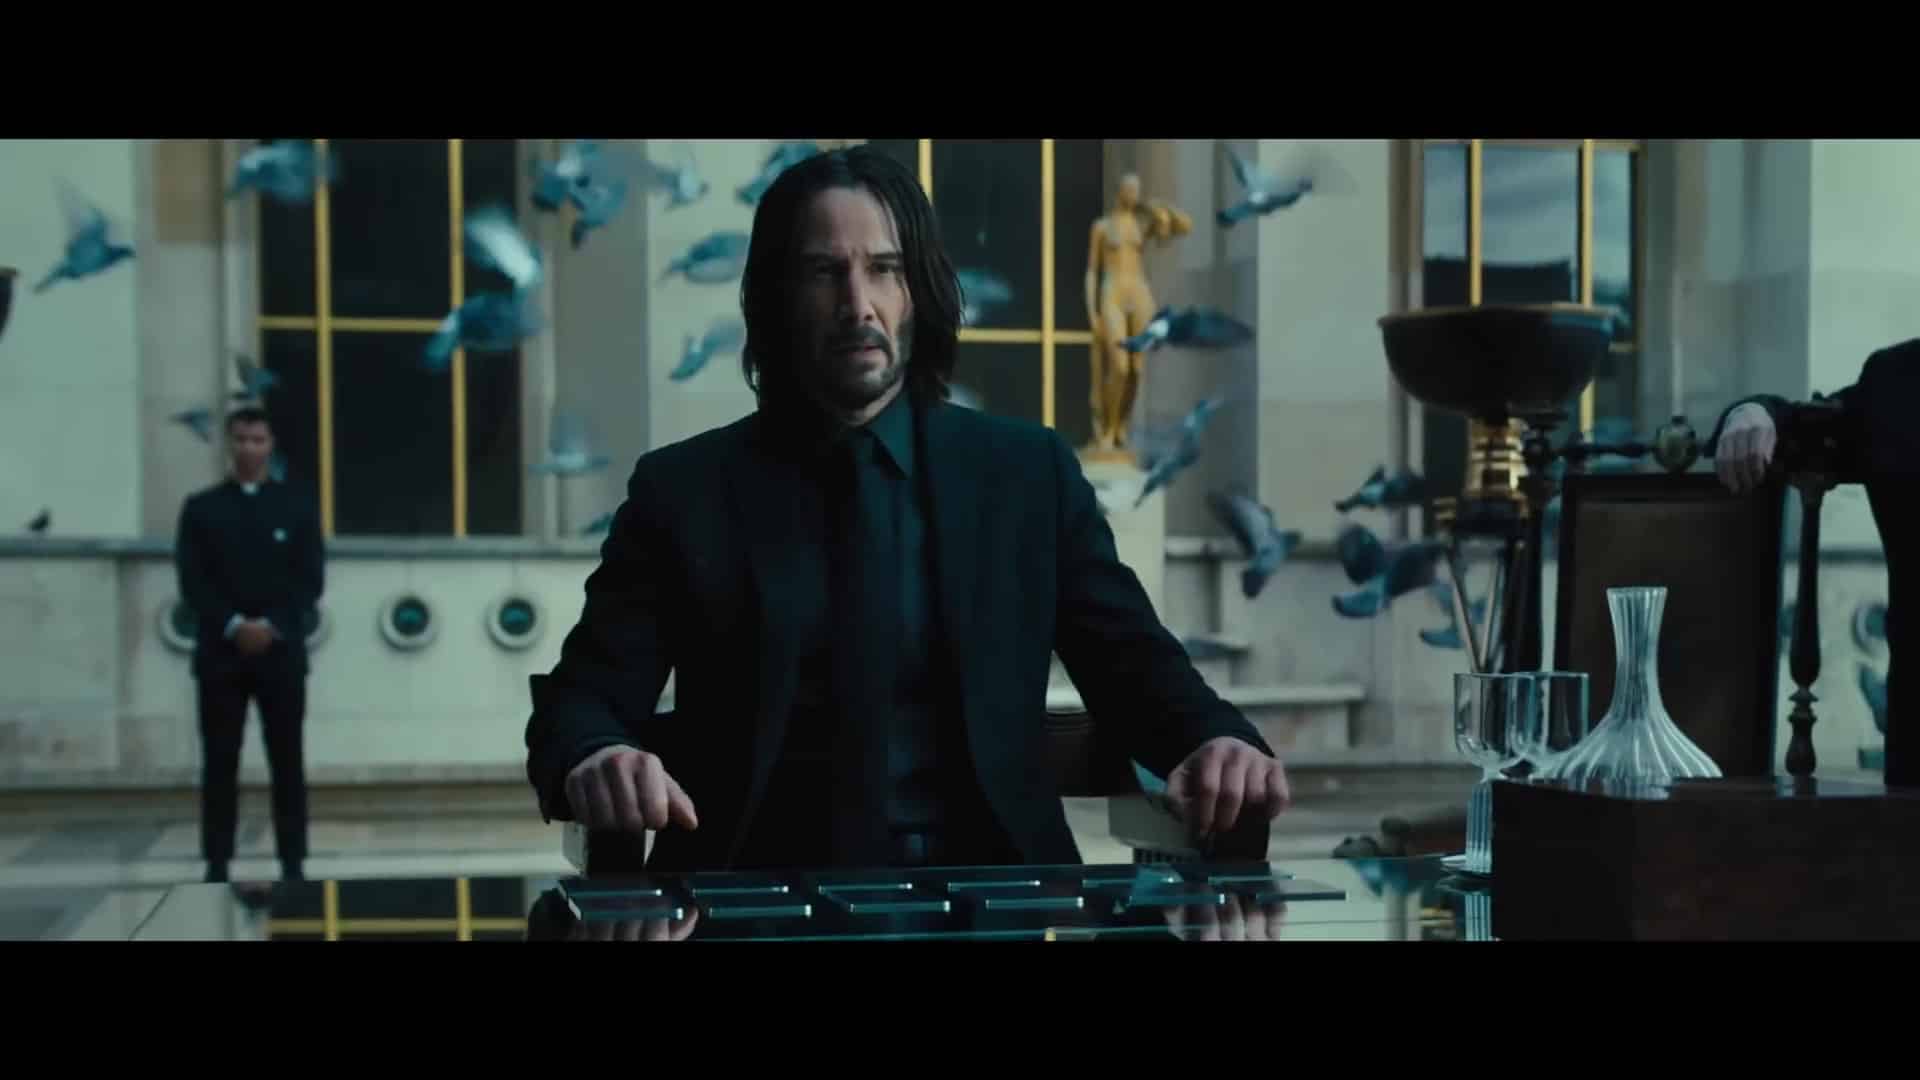 The first trailer for John Wick 4 promises a lot of action